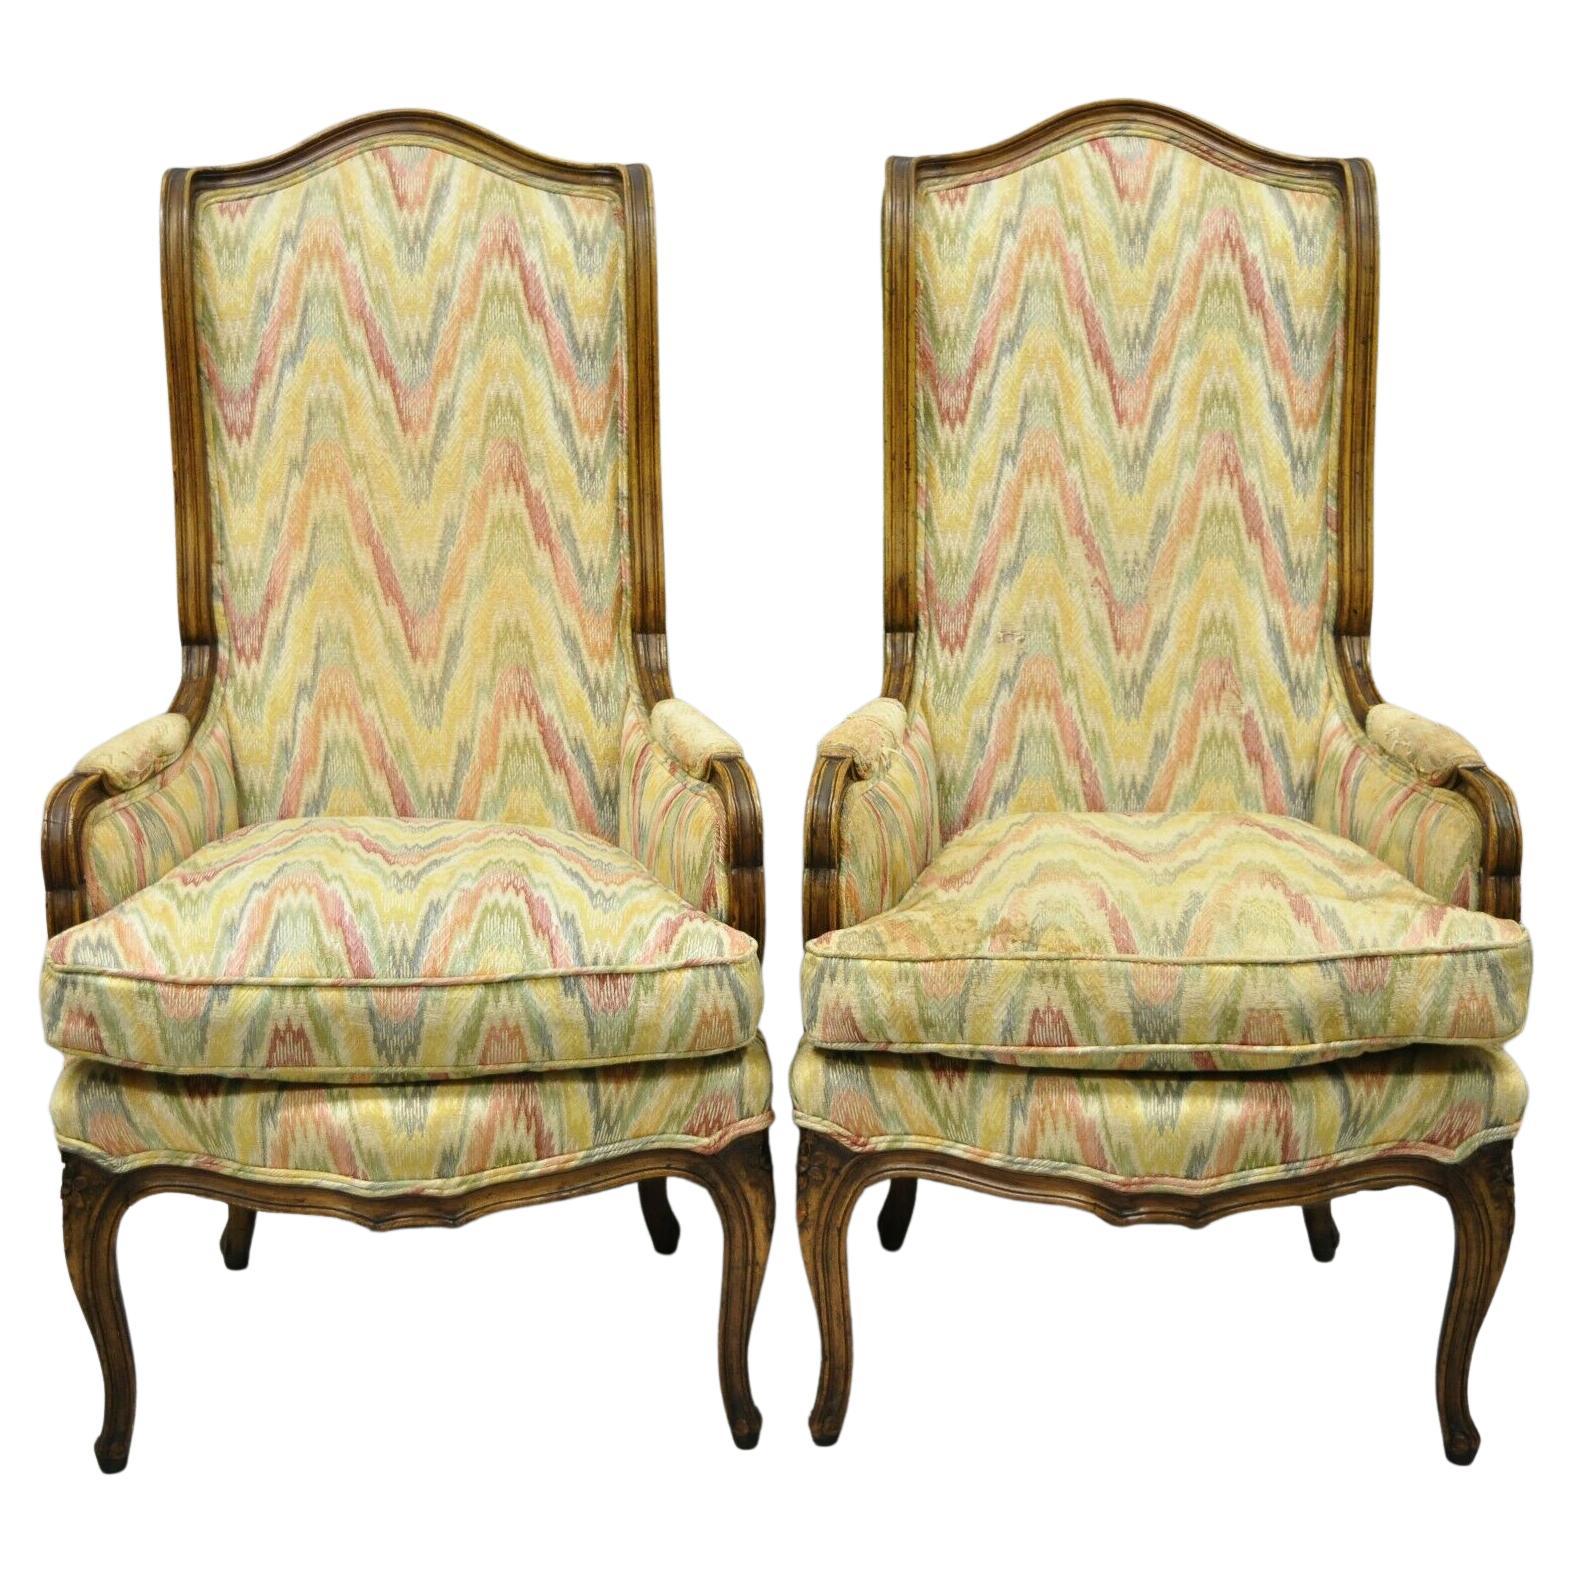 Vintage French Provincial Louis XV Country Narrow Tall Back Chairs 'B' - a Pair For Sale